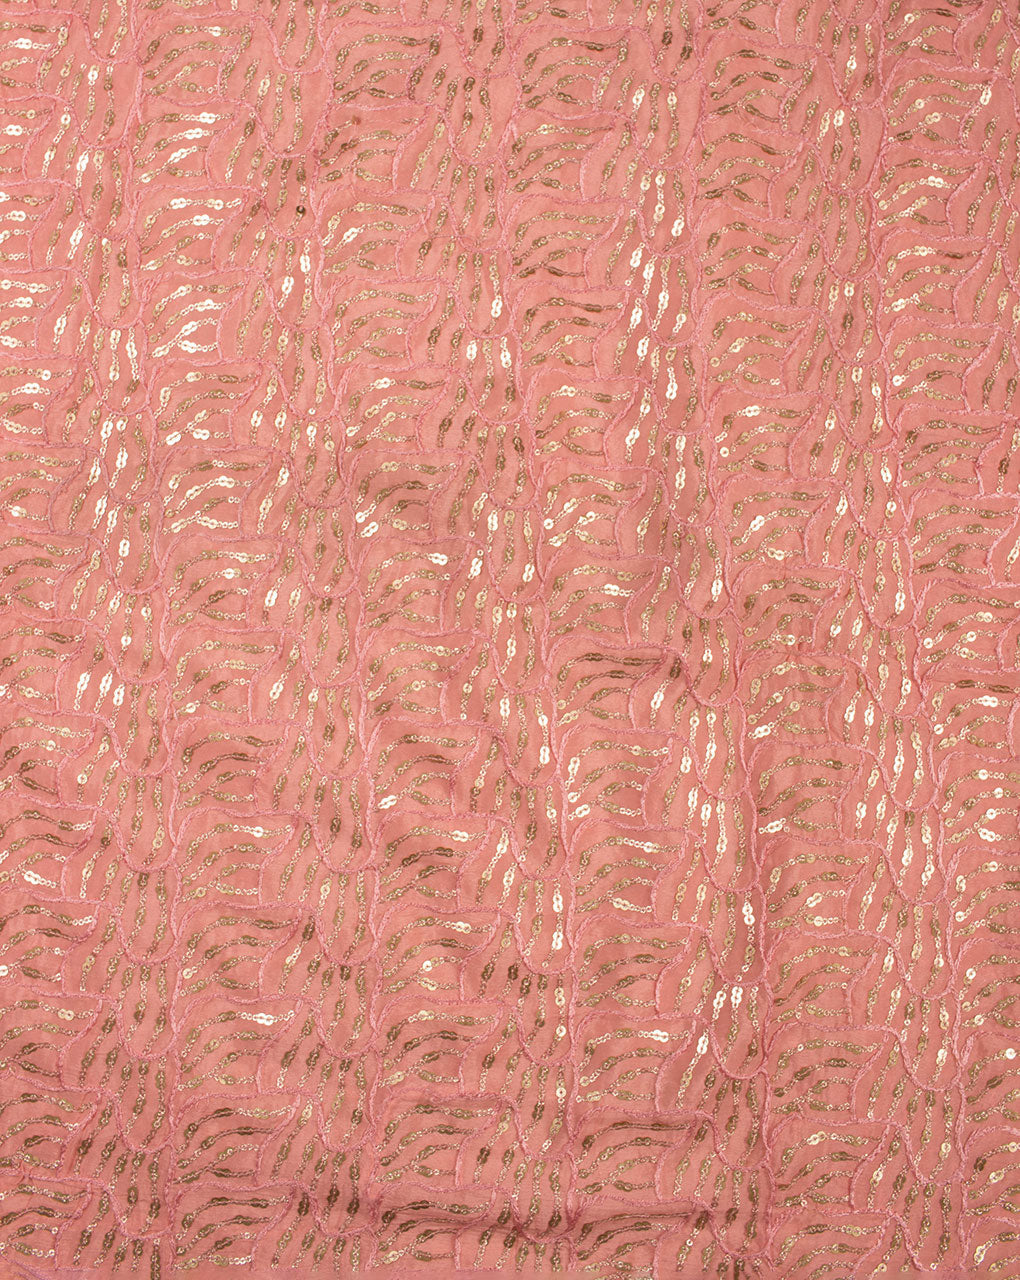 Embroidered Sequins Work Chinnon Chiffon Fabric - Fabriclore.com